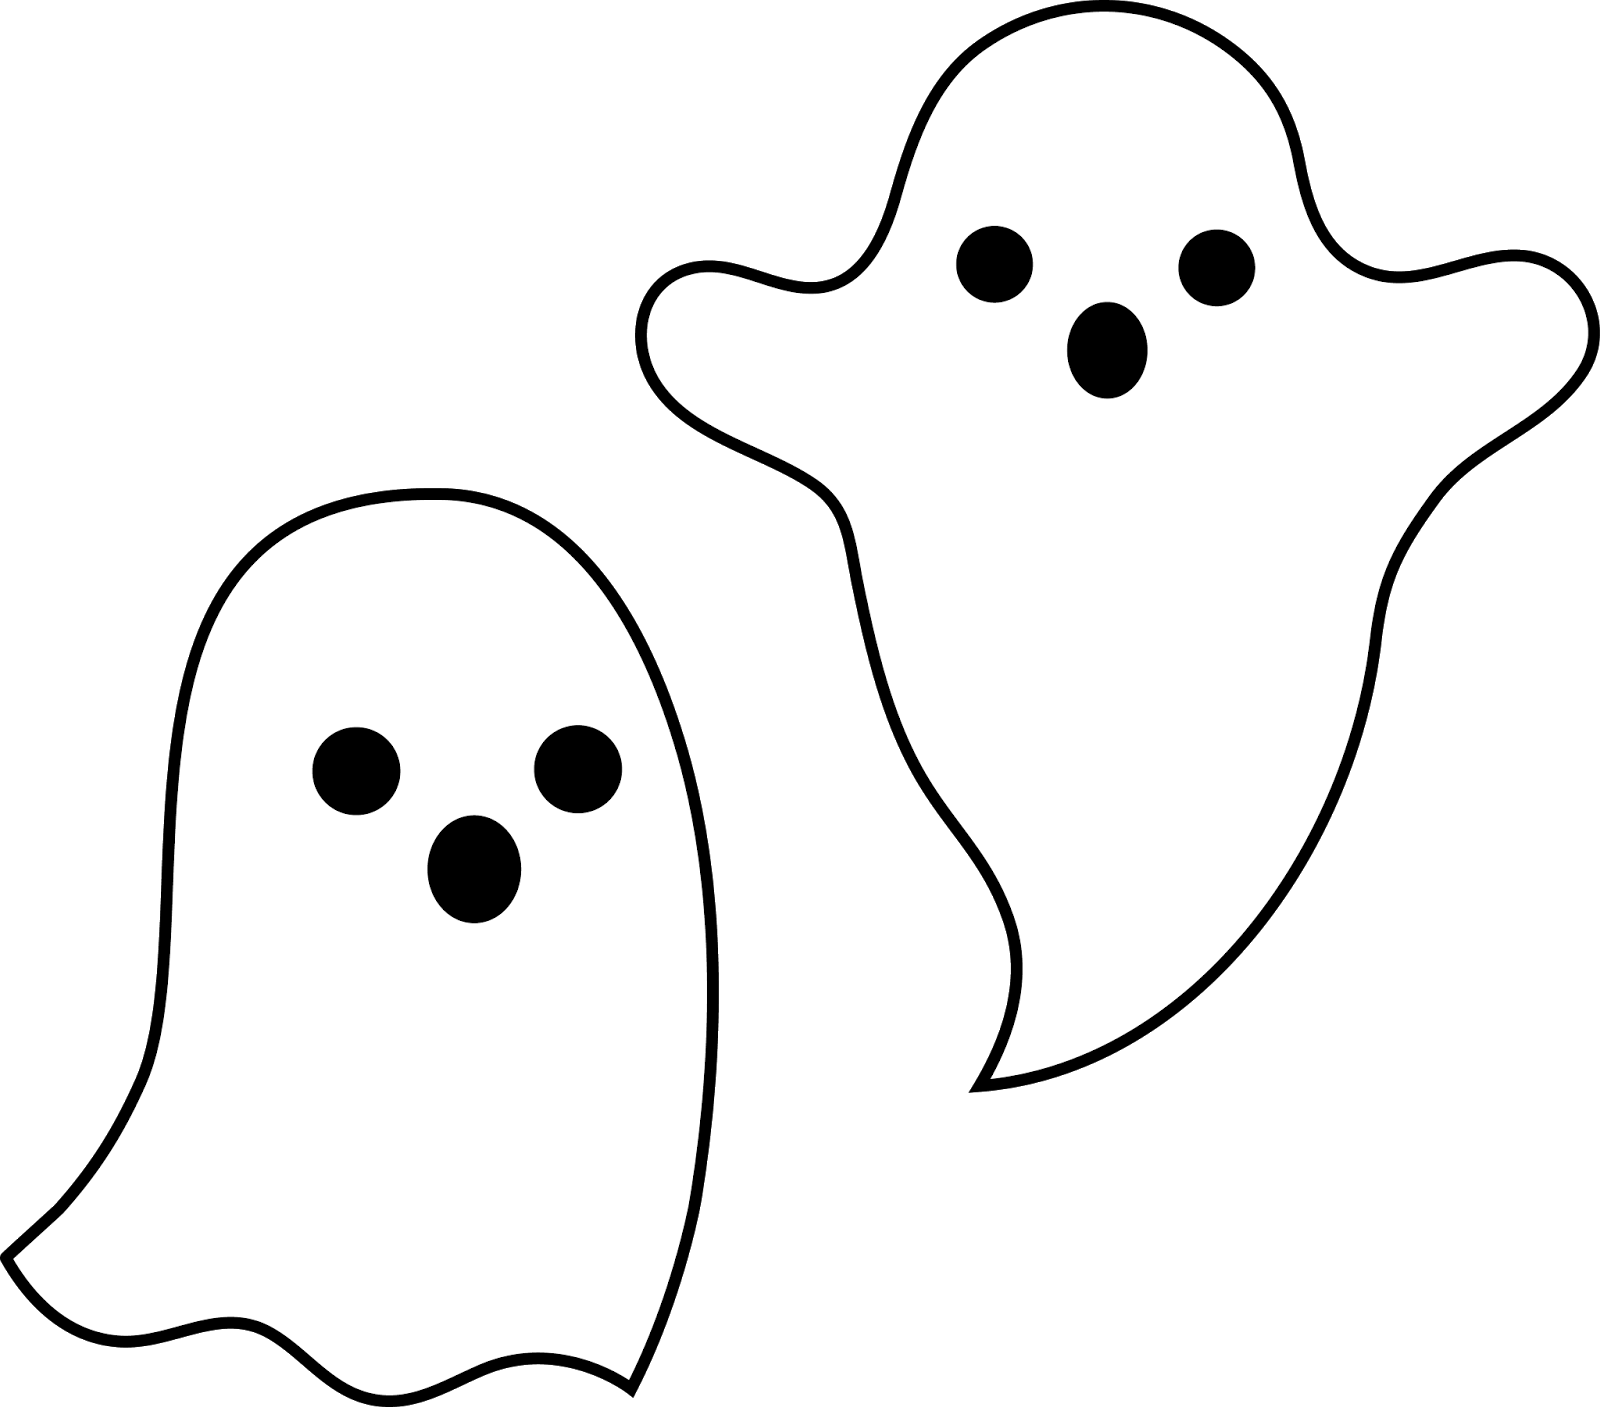 Ghost silhouette at getdrawings. Pacman clipart black and white